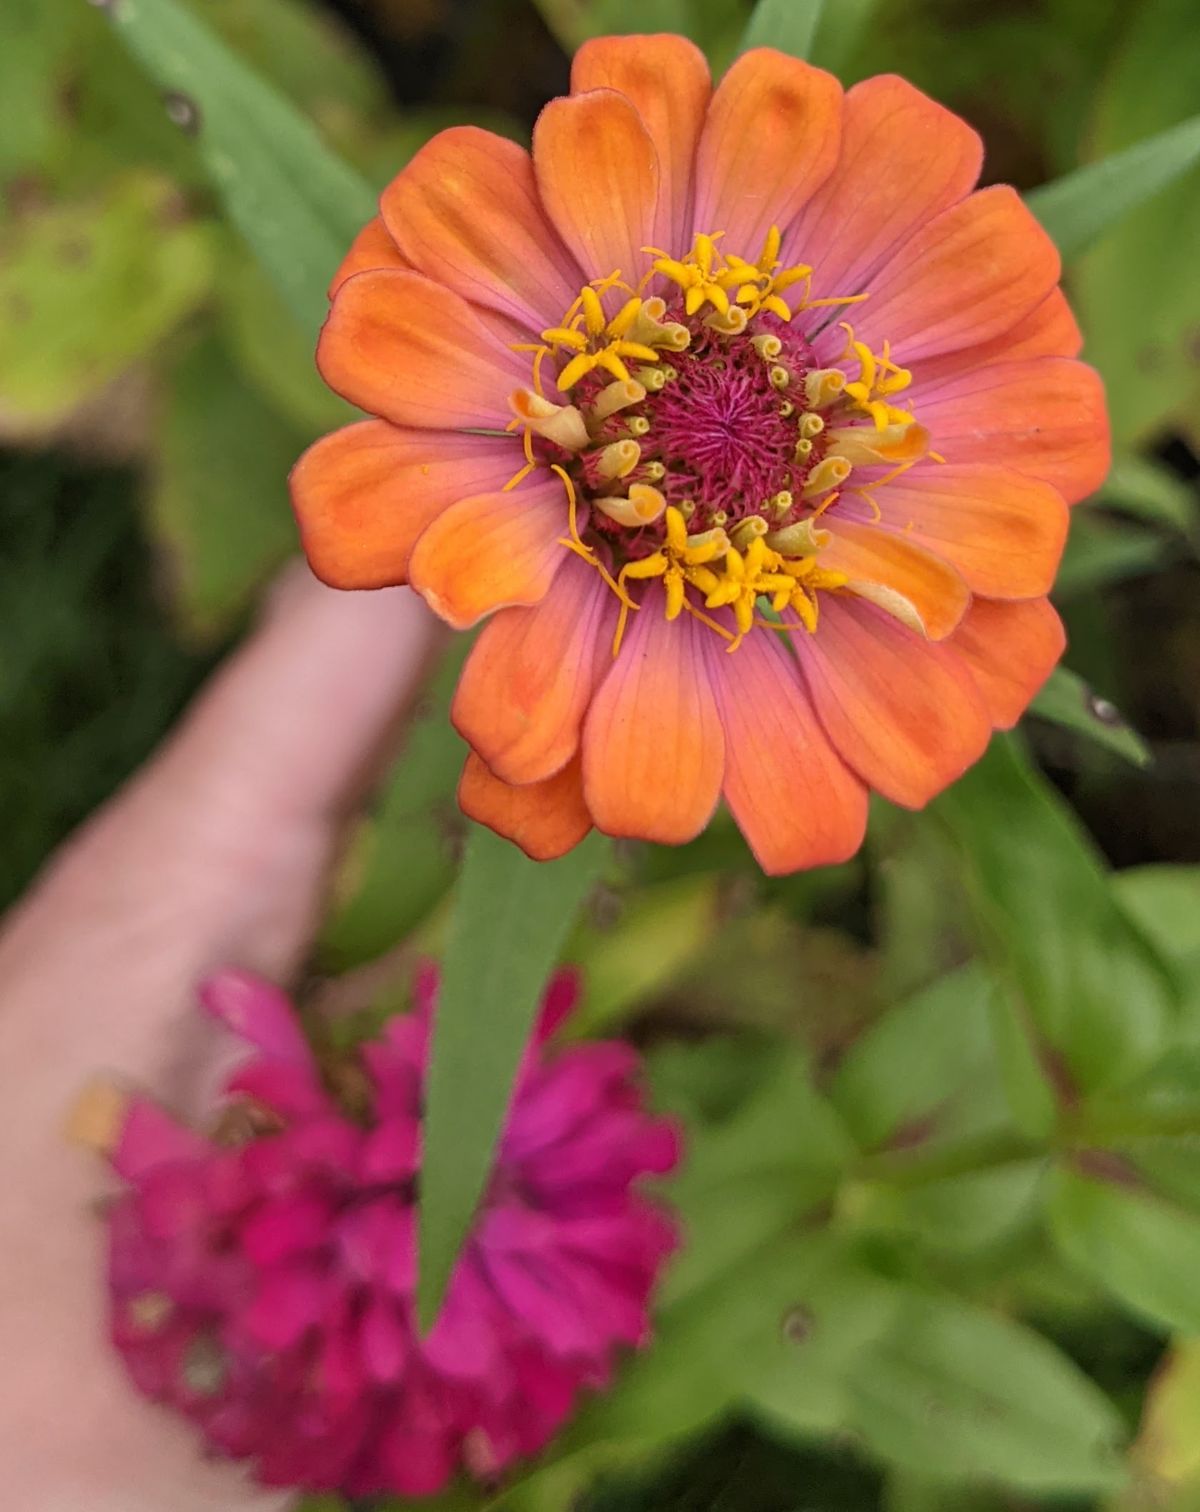 Raspberry zinnia blossom and orange zinnia with pink center growing from the same zinnia plant